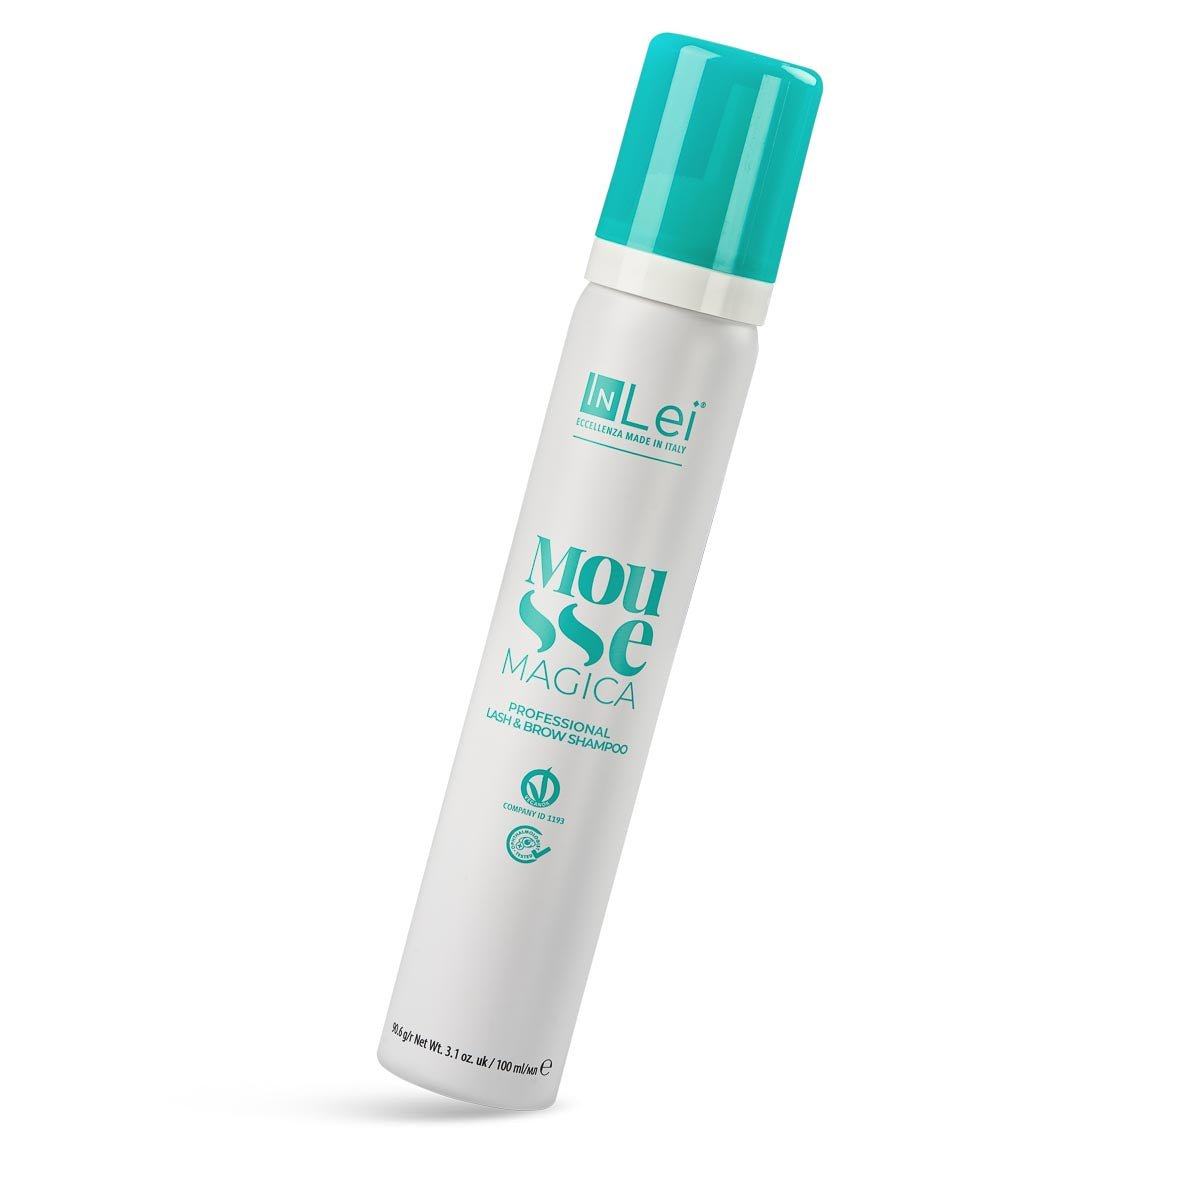 InLei - MOUSSE MAGICA - PROFESSIONAL SHAMPOO FOR EYELASHES AND EYEBROWS 100M - inlei.com